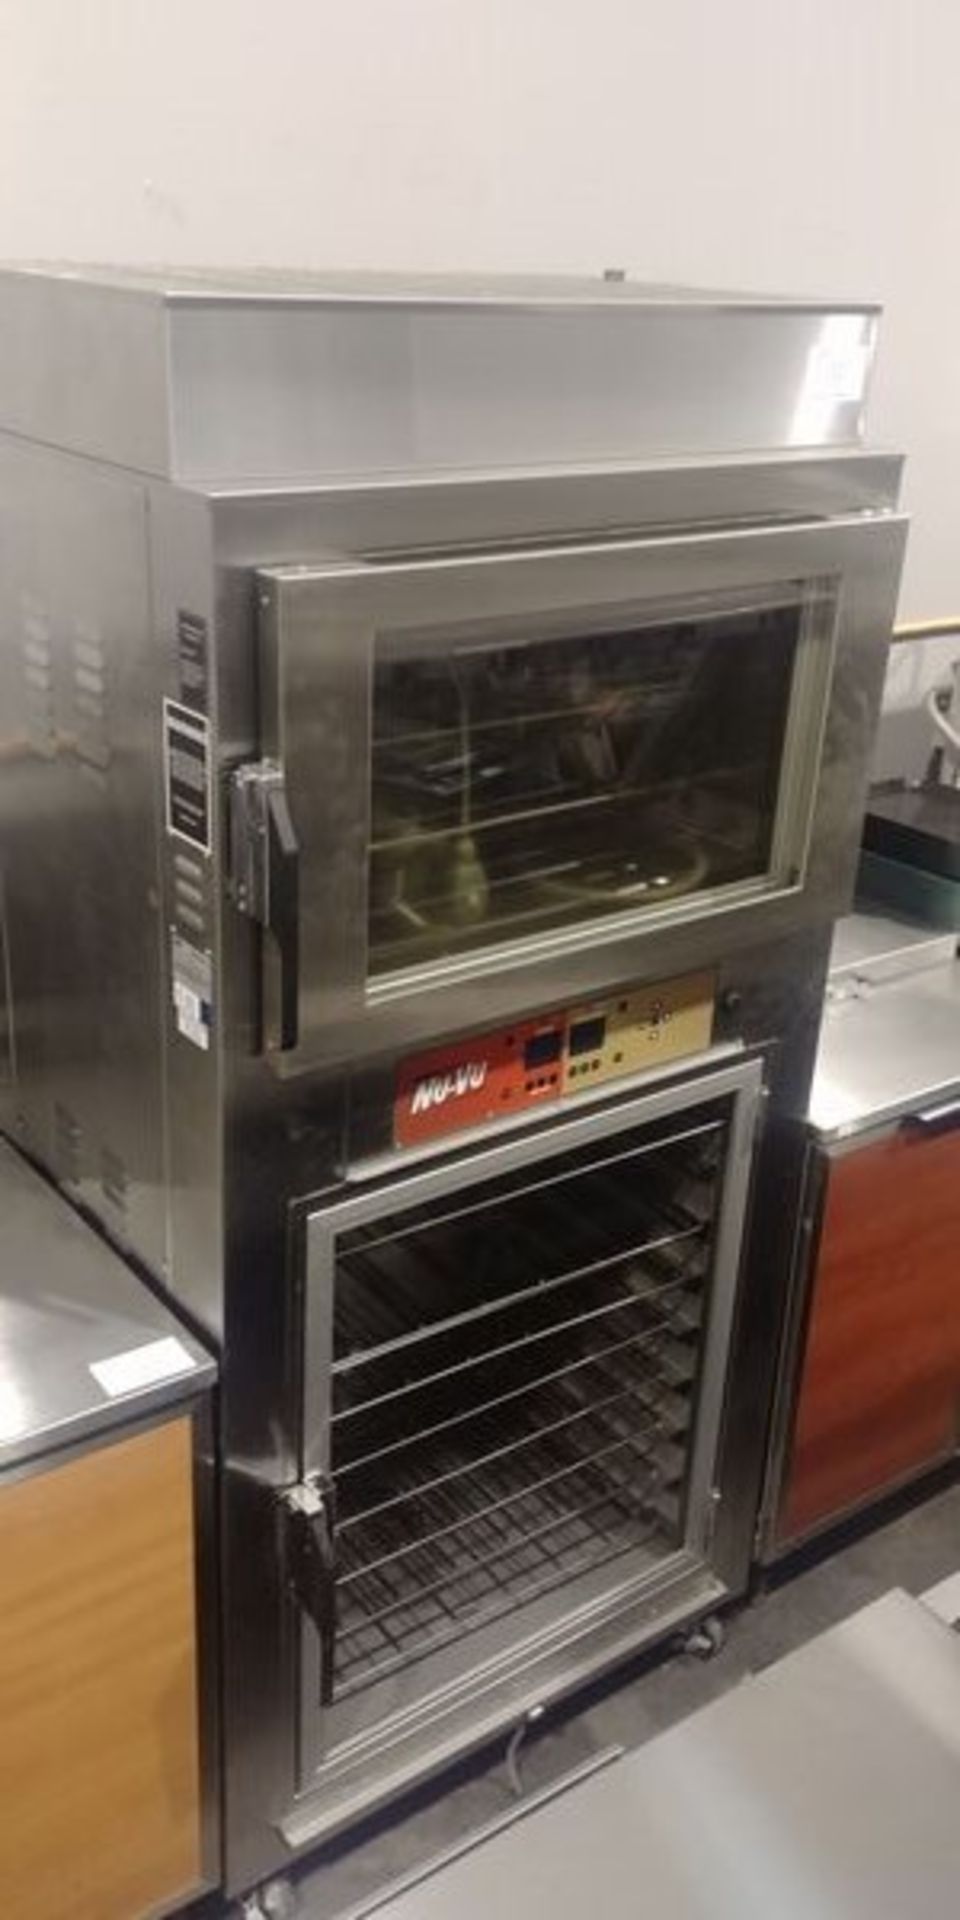 Nu-Vu Electric Bake Oven with Proofer with Steam - Model SUB-123P